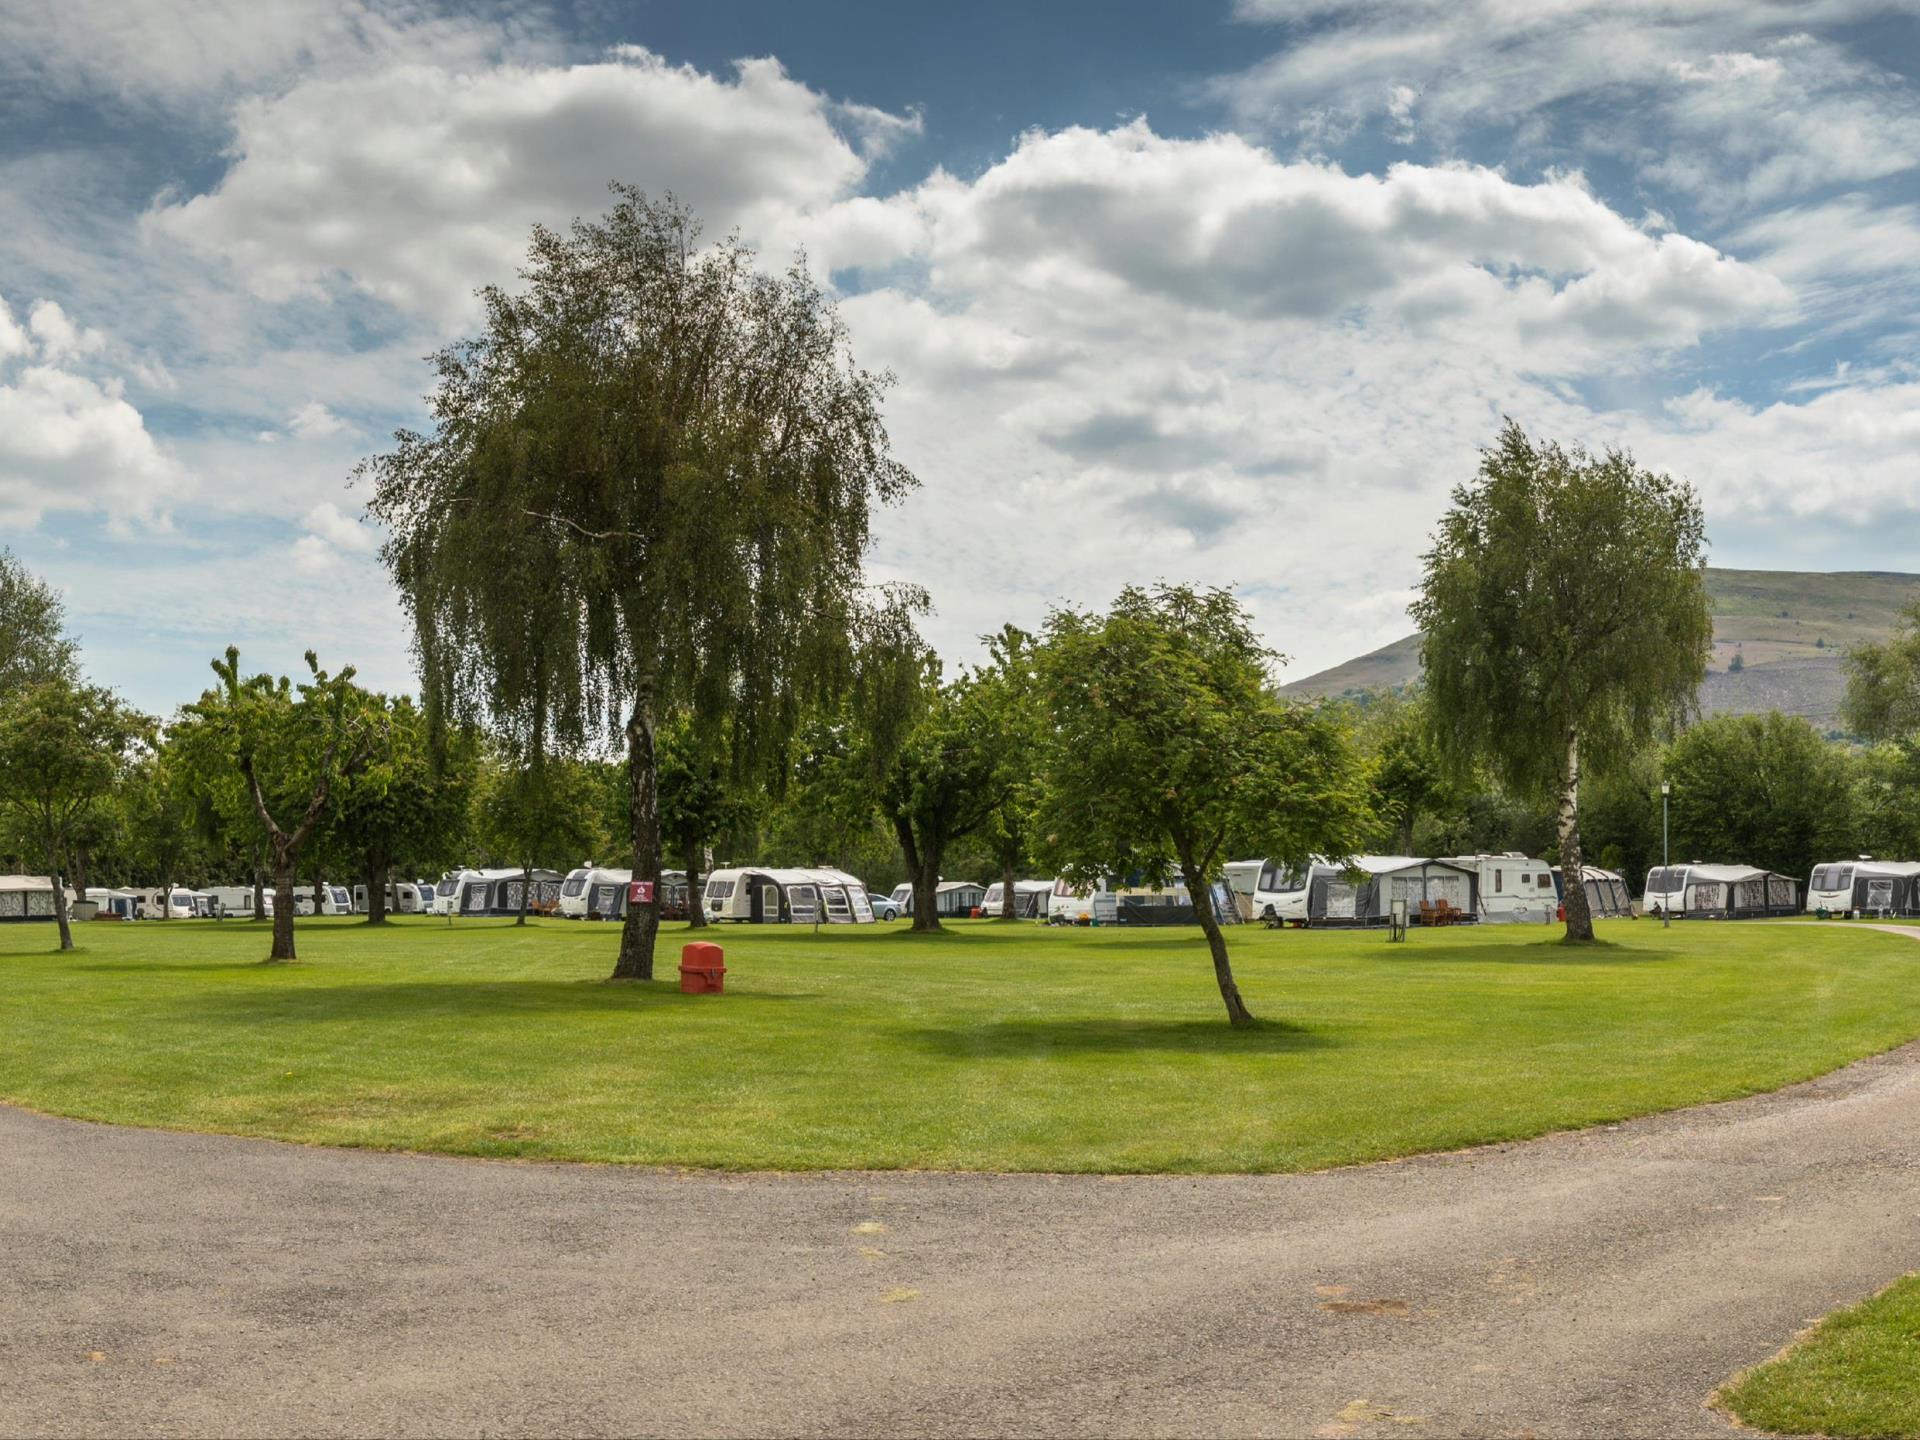 We cater for caravans, motorhomes and tents